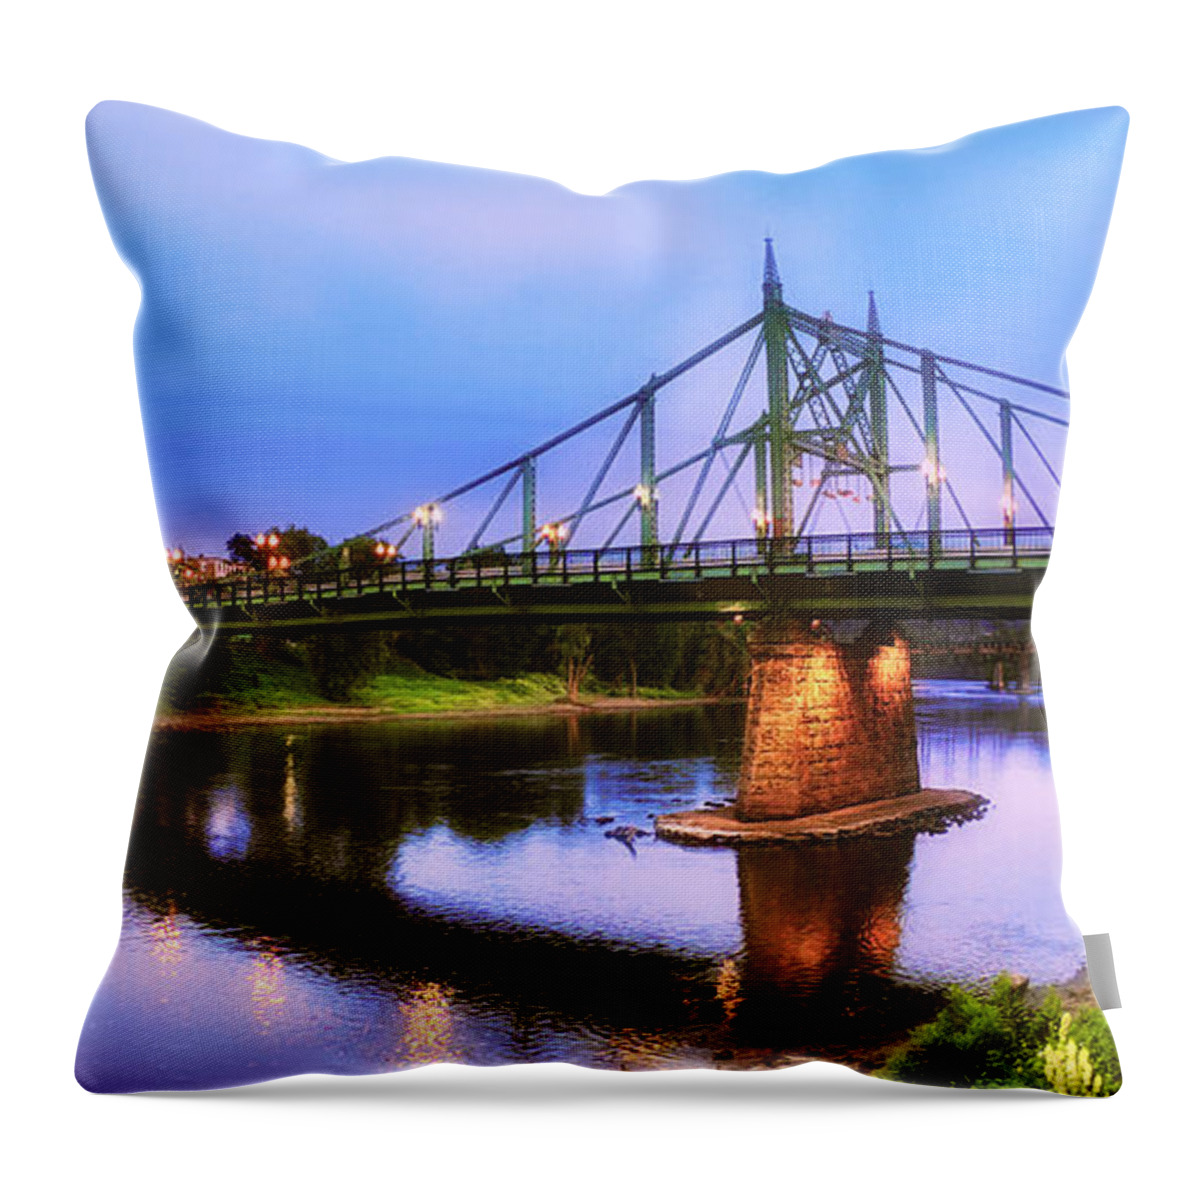 Free Throw Pillow featuring the photograph The Free Bridge by Mark Miller